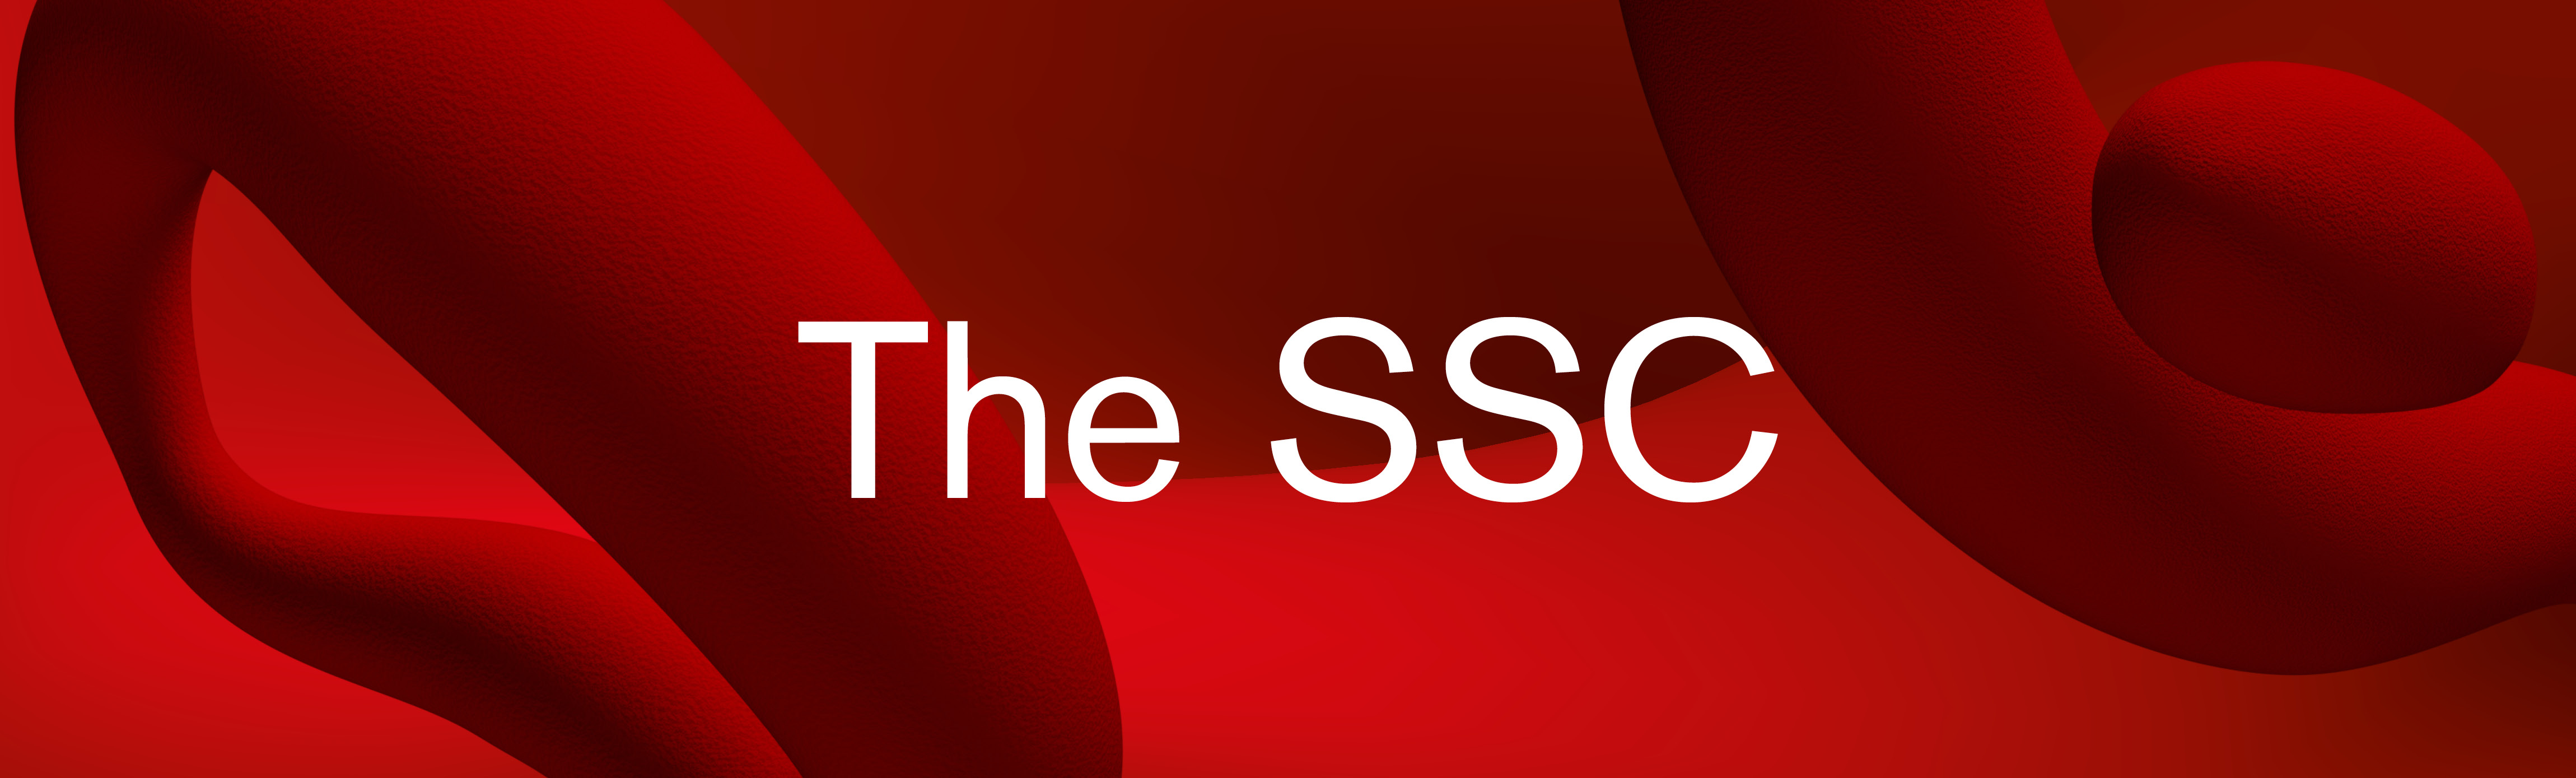 The SSC